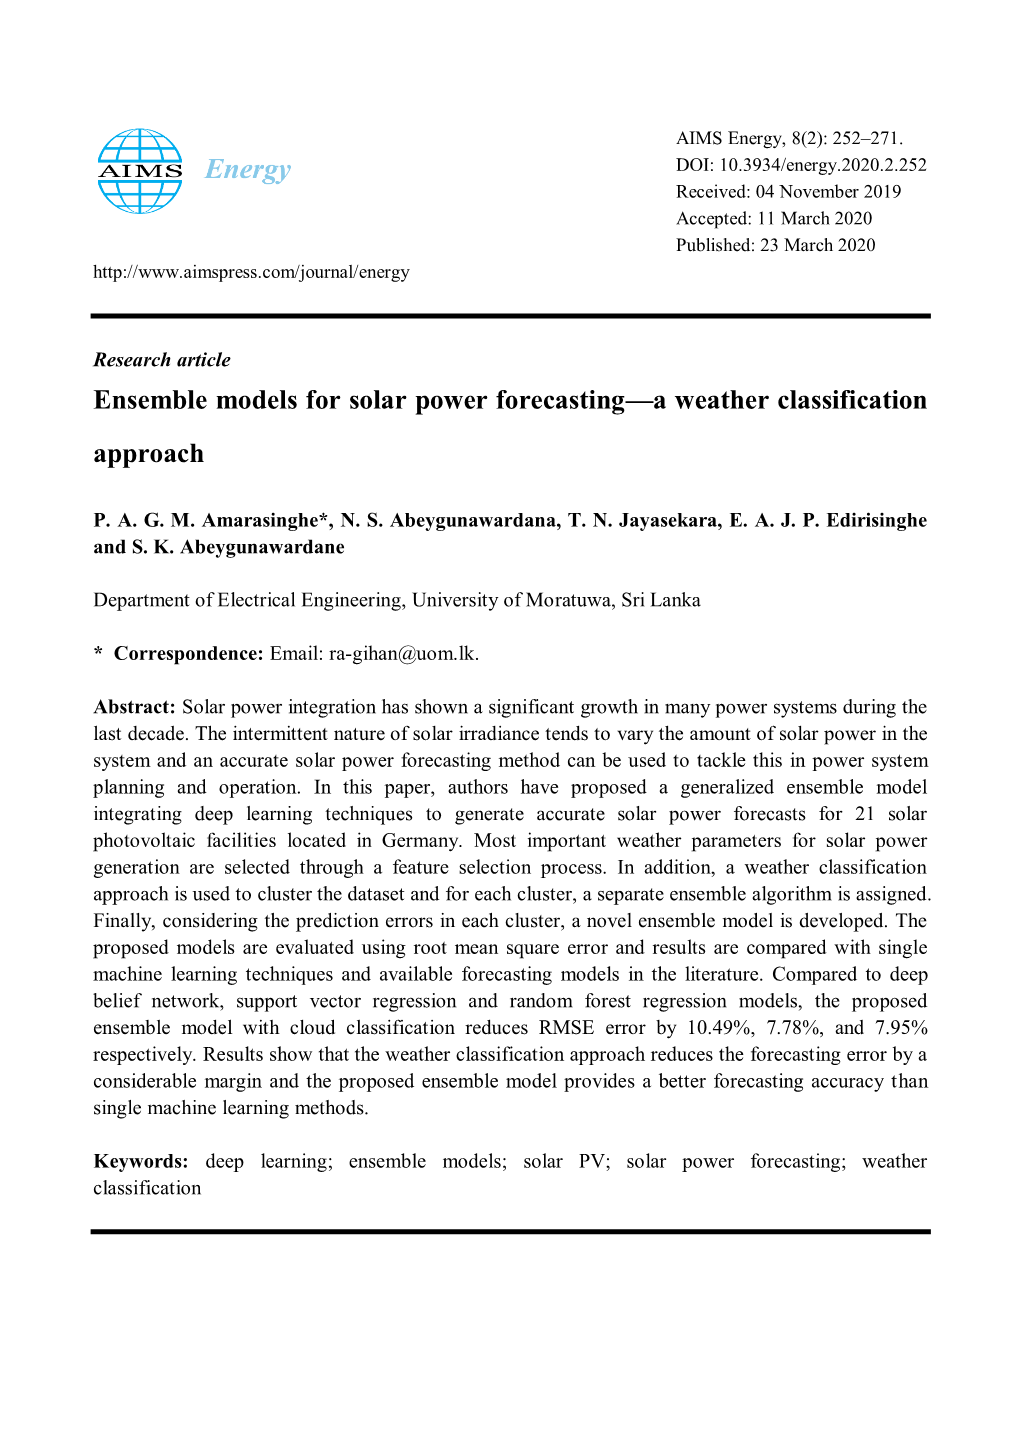 Ensemble Models for Solar Power Forecasting—A Weather Classification Approach